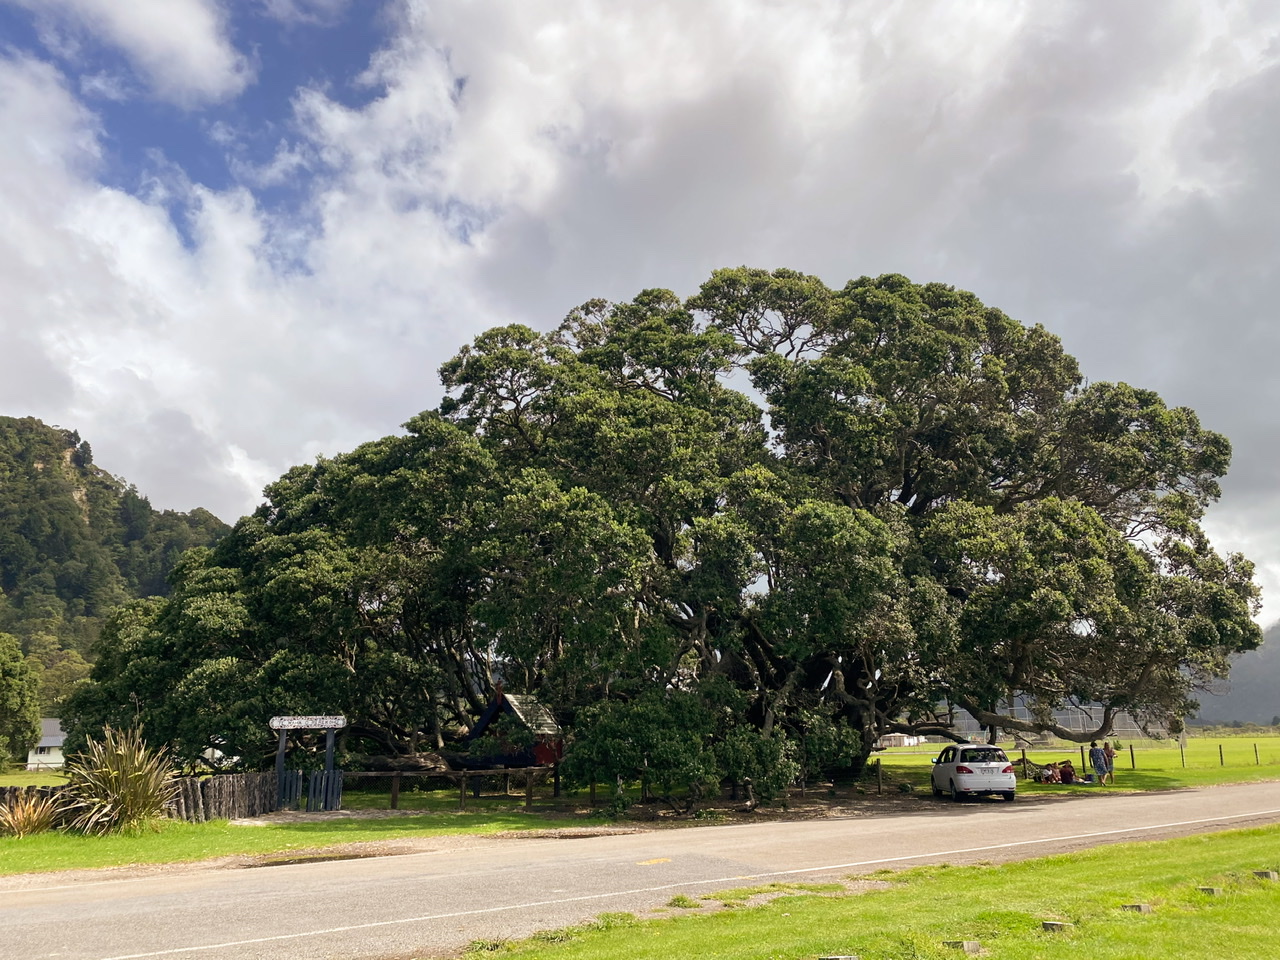 Very large green pōhutukawa tree with a white car parked underneath it and four people picnicing viewed from across a street